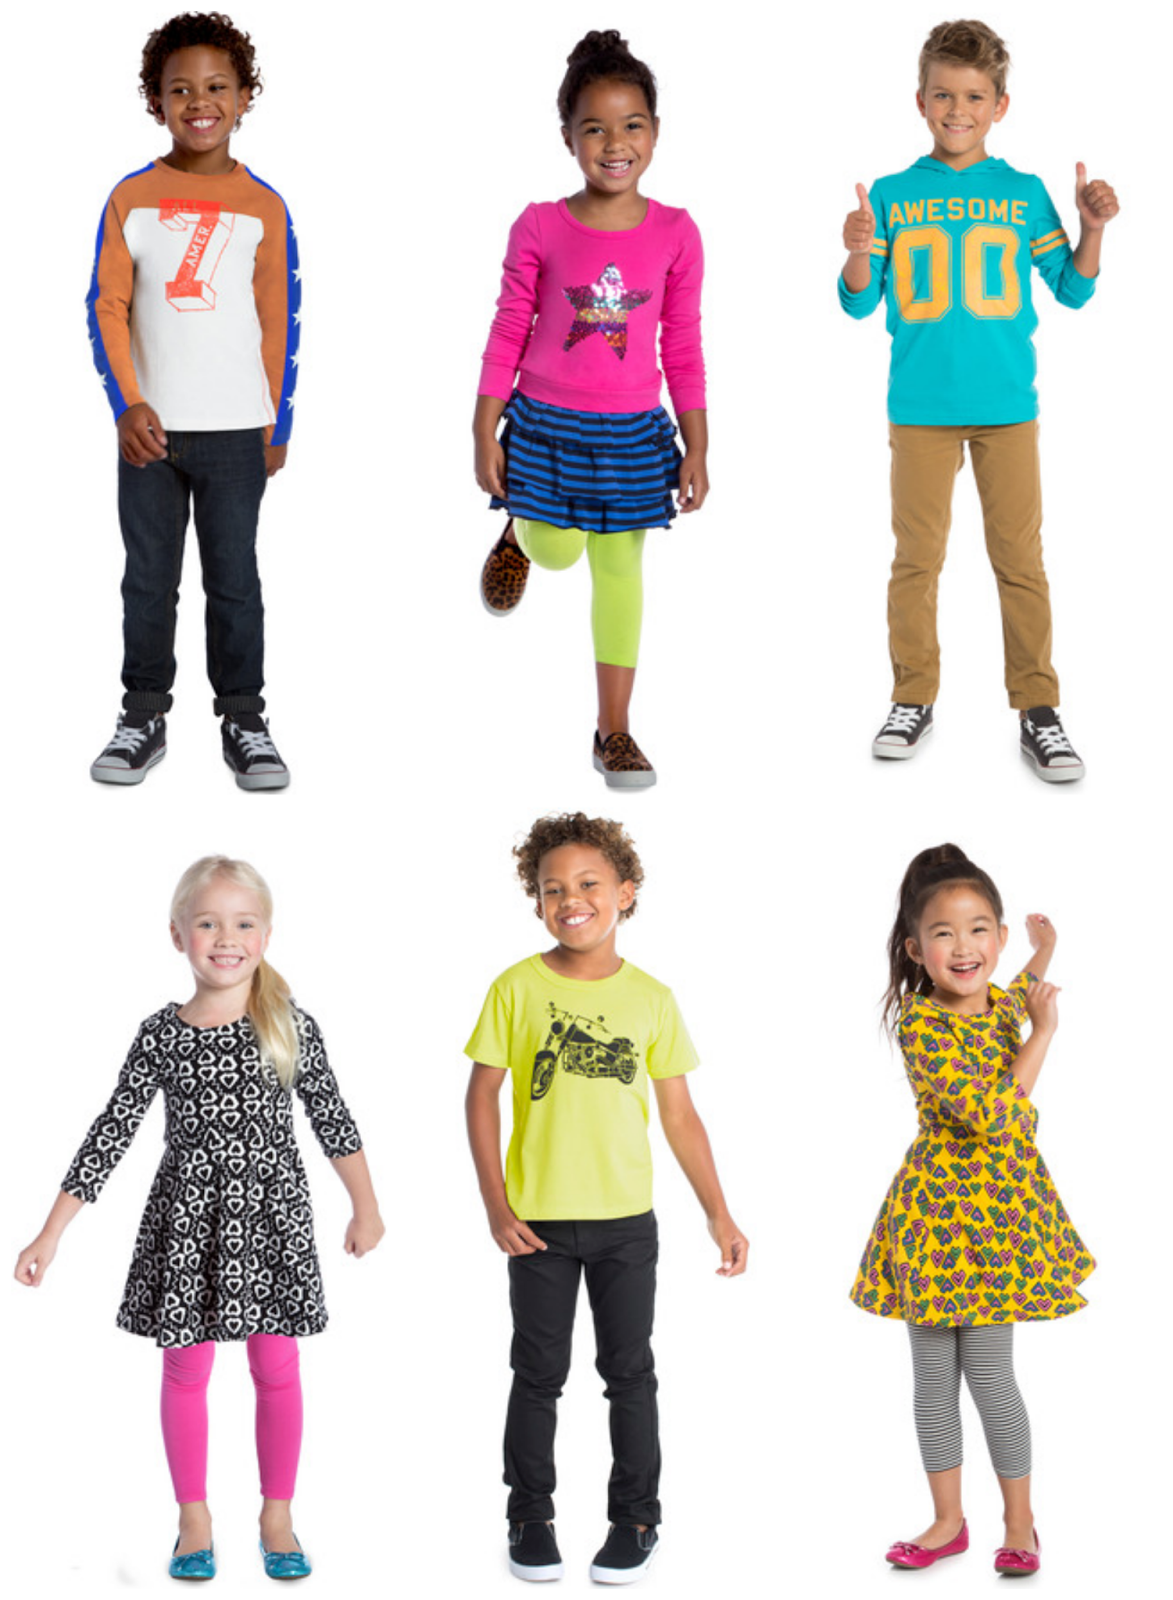 Fab Kids August Edition for Back to School - AnnMarie John